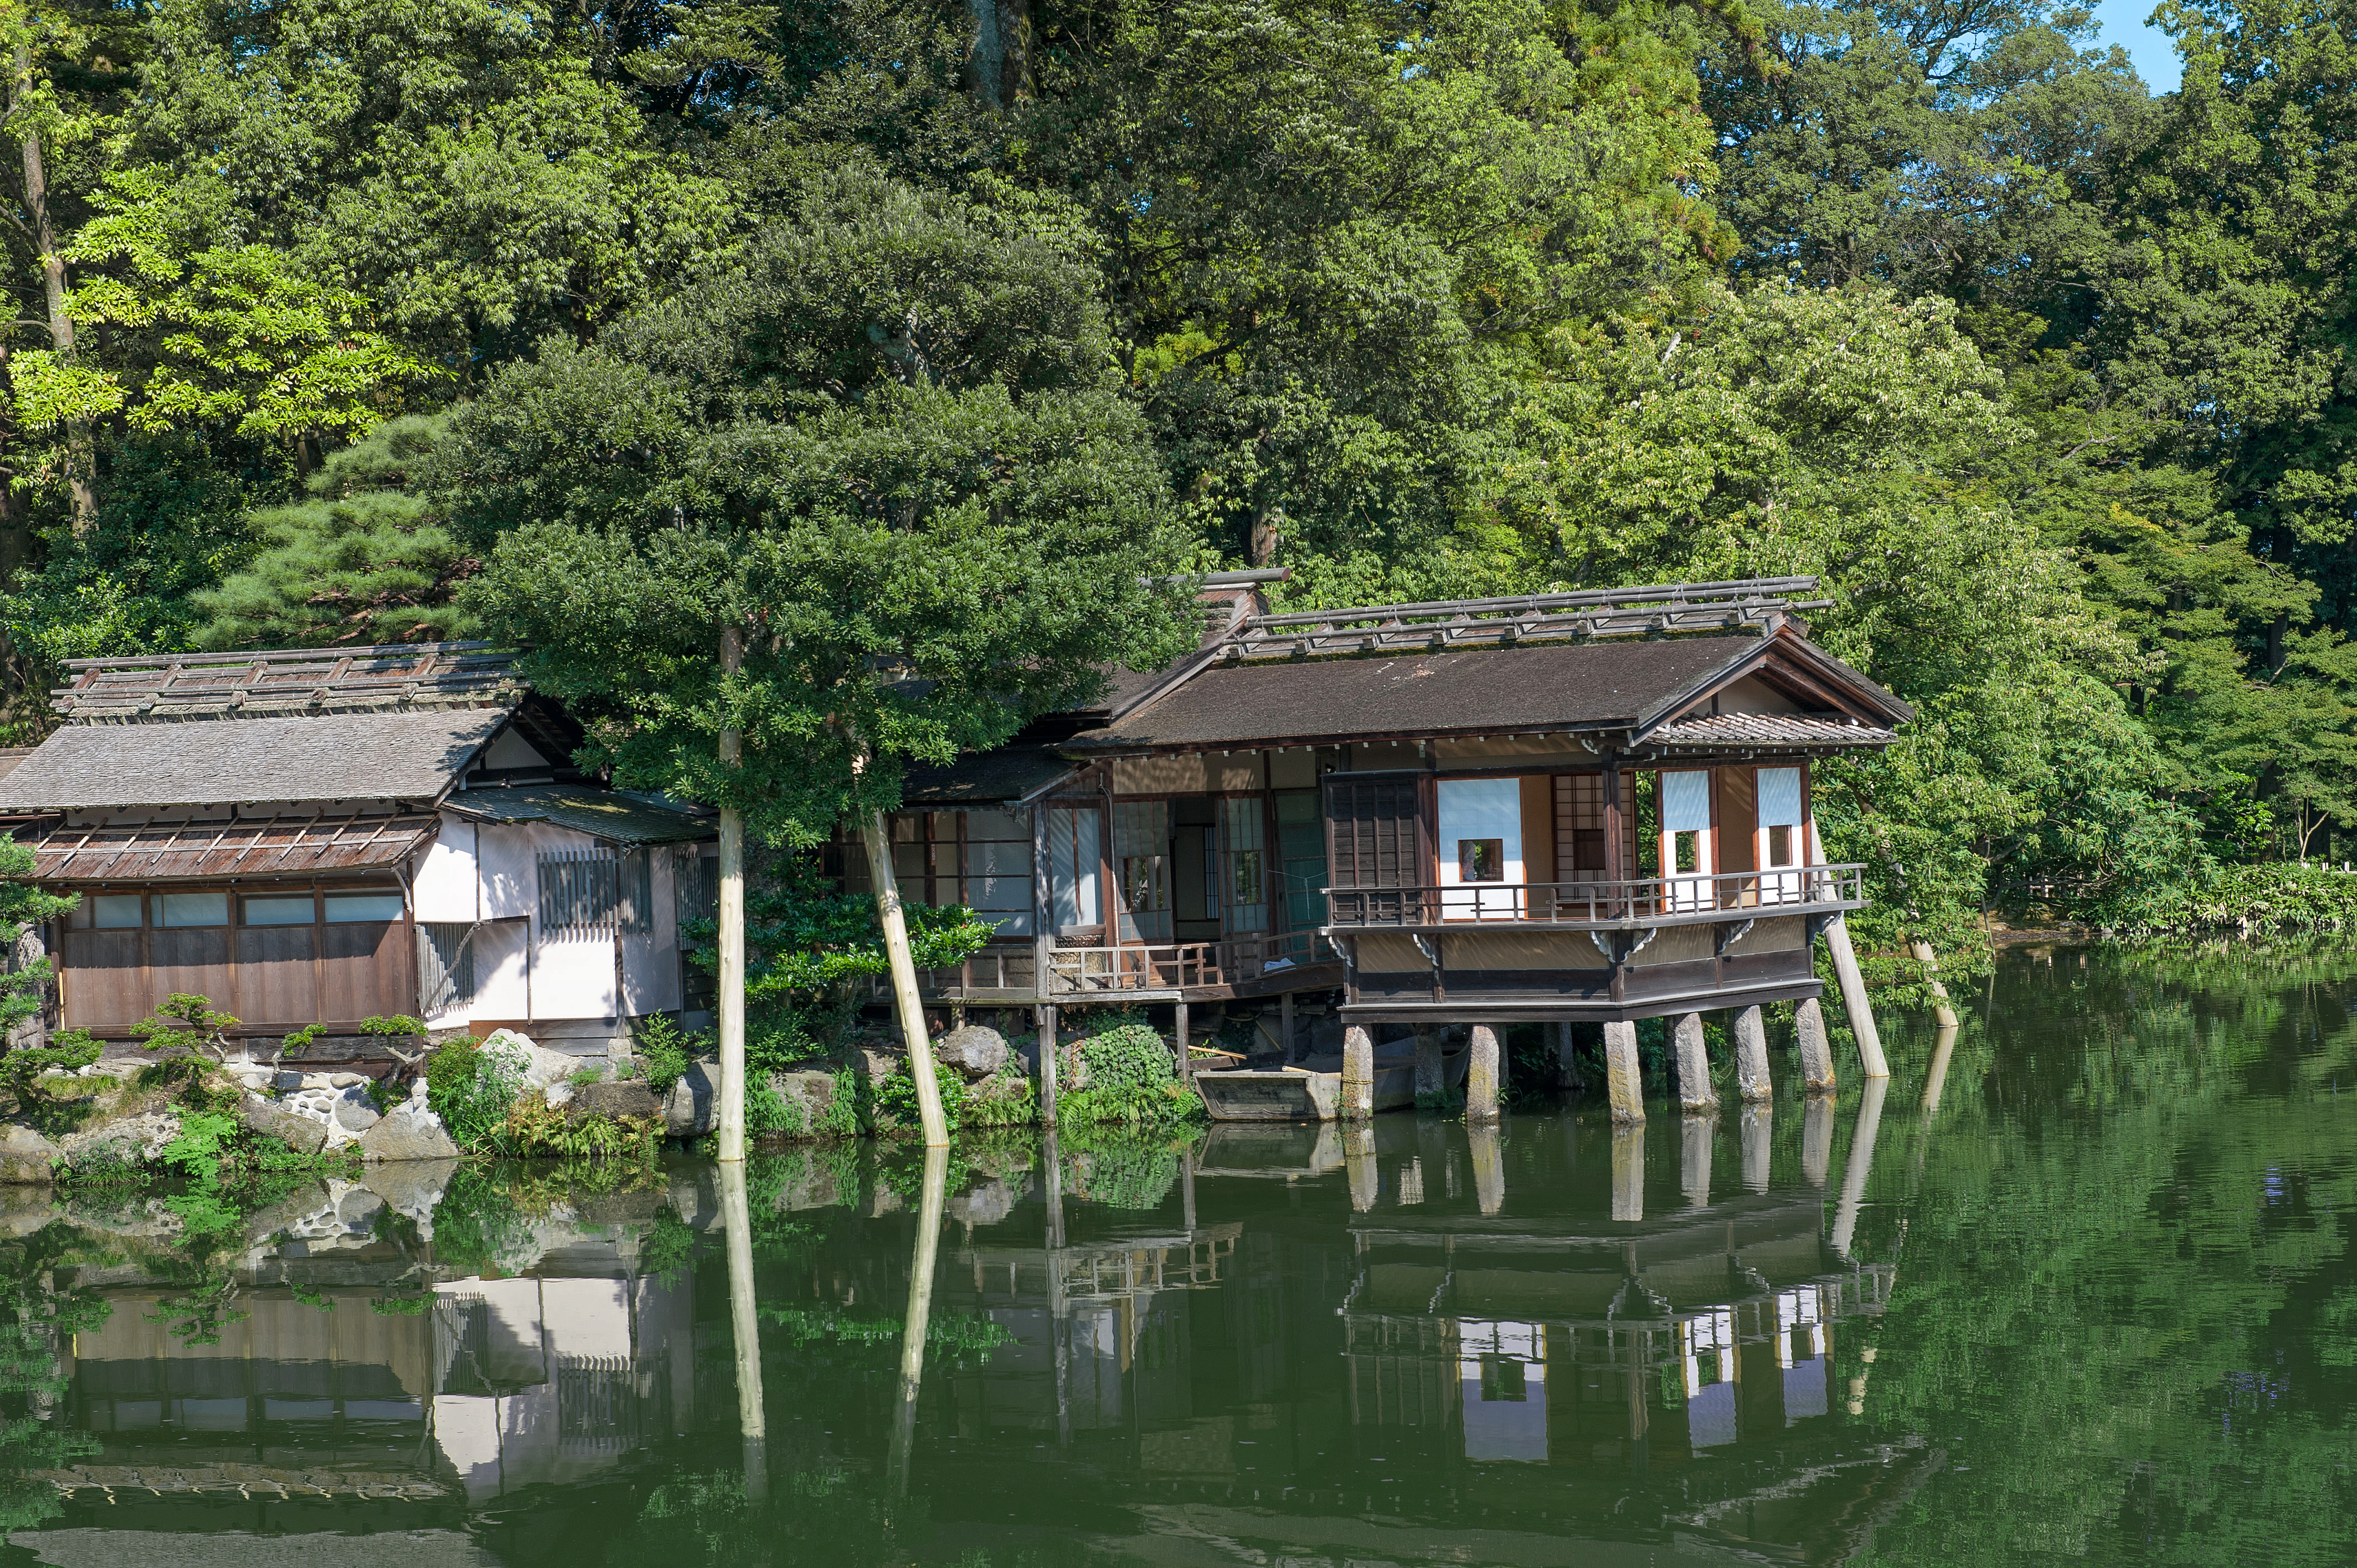 A teahouse in Kenroku-en is appealingly cantilevered over the garden’s large pond. | STEPHEN MANSFIELD